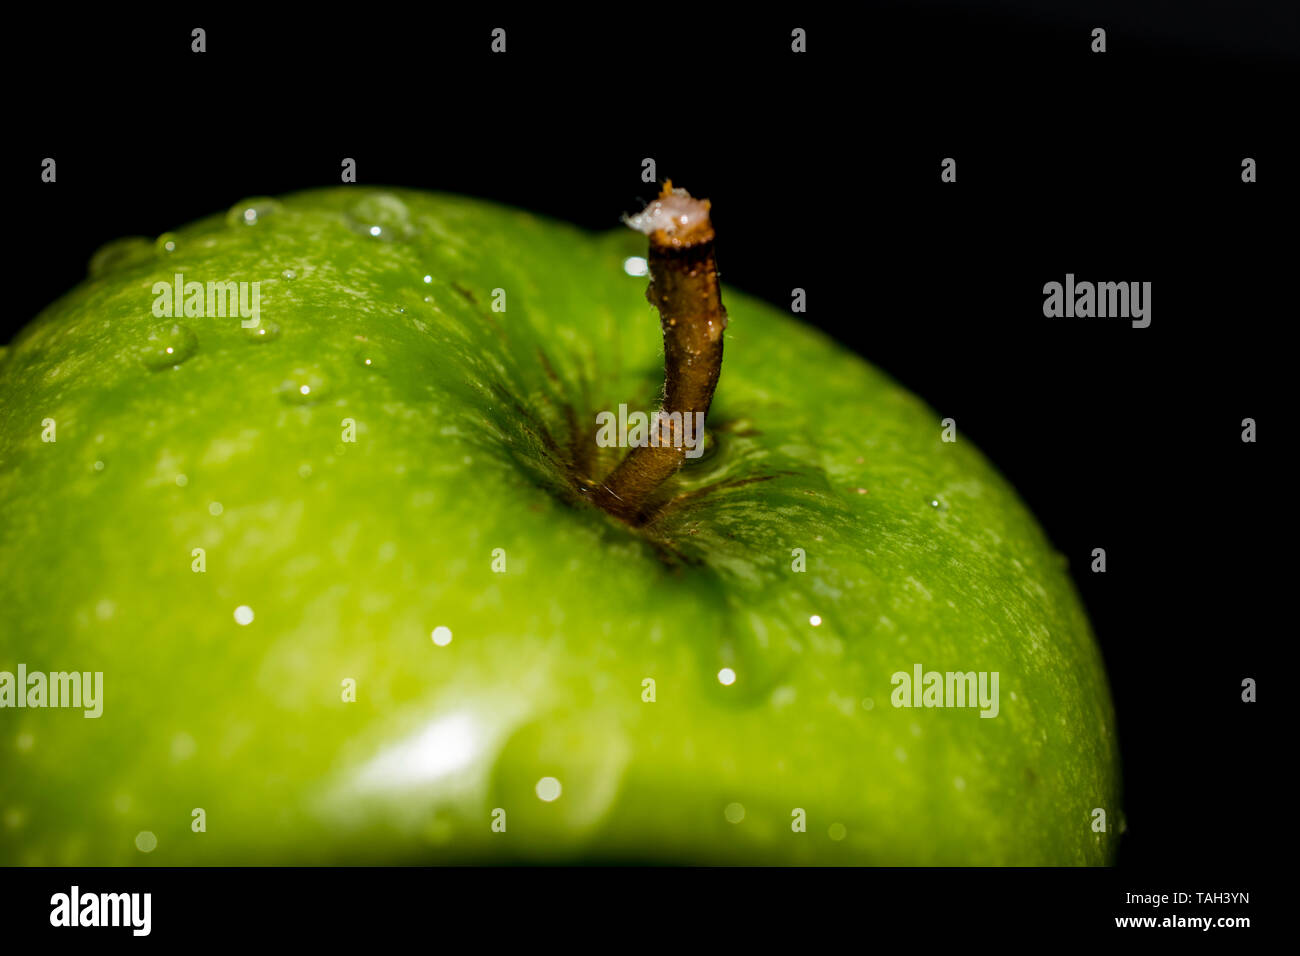 Green Granny Smith crispy fresh apple with dew drops of water glistening on the skin with a black background Stock Photo